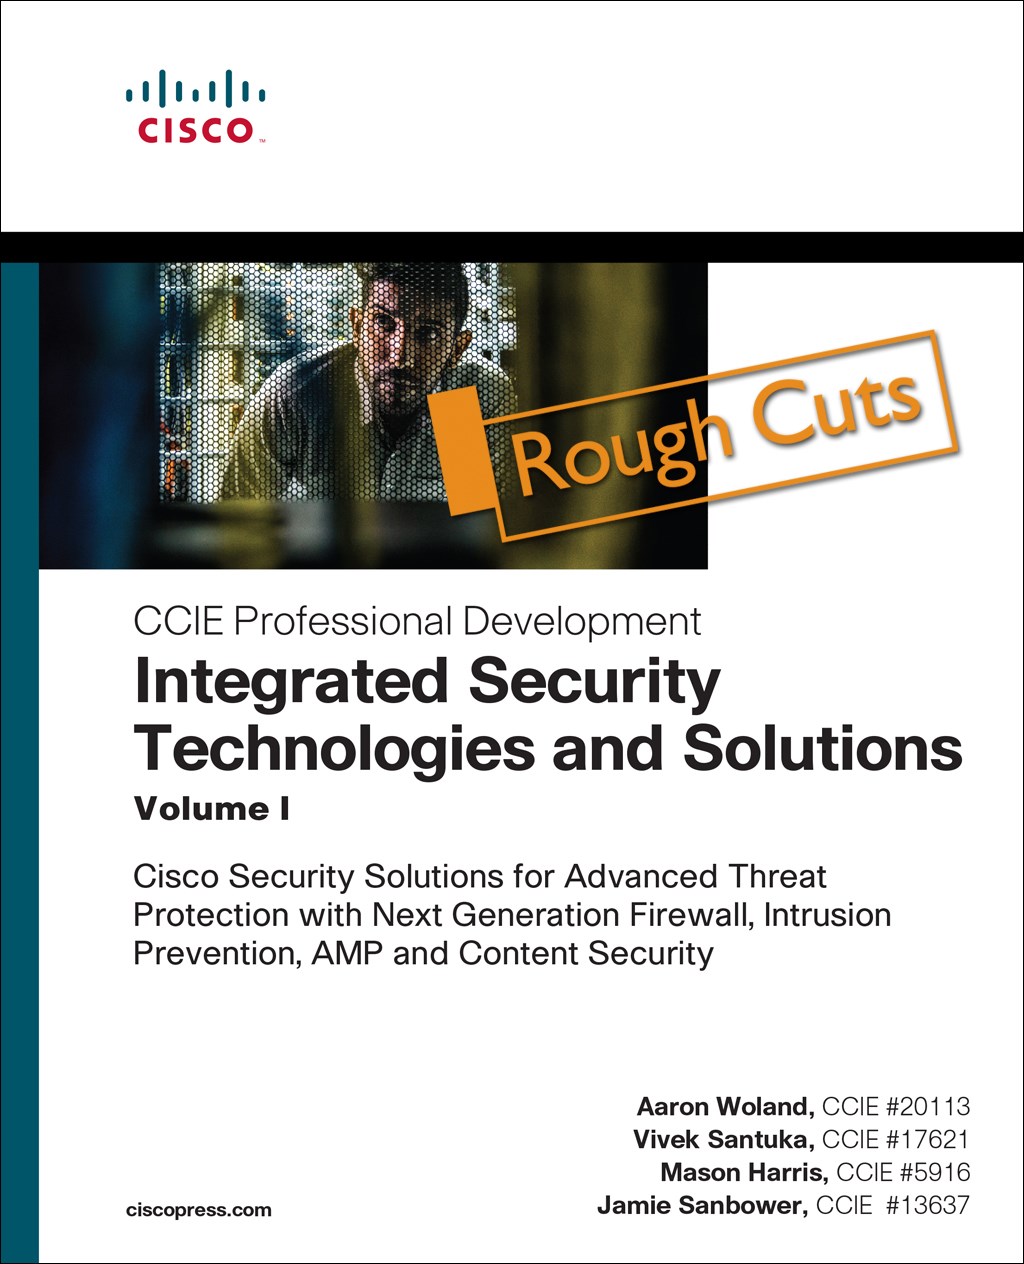 Integrated Security Technologies and Solutions - Volume I: Cisco Security Solutions for Advanced Threat Protection with Next Generation Firewall, Intrusion Prevention, AMP, and Content Security, Rough Cuts